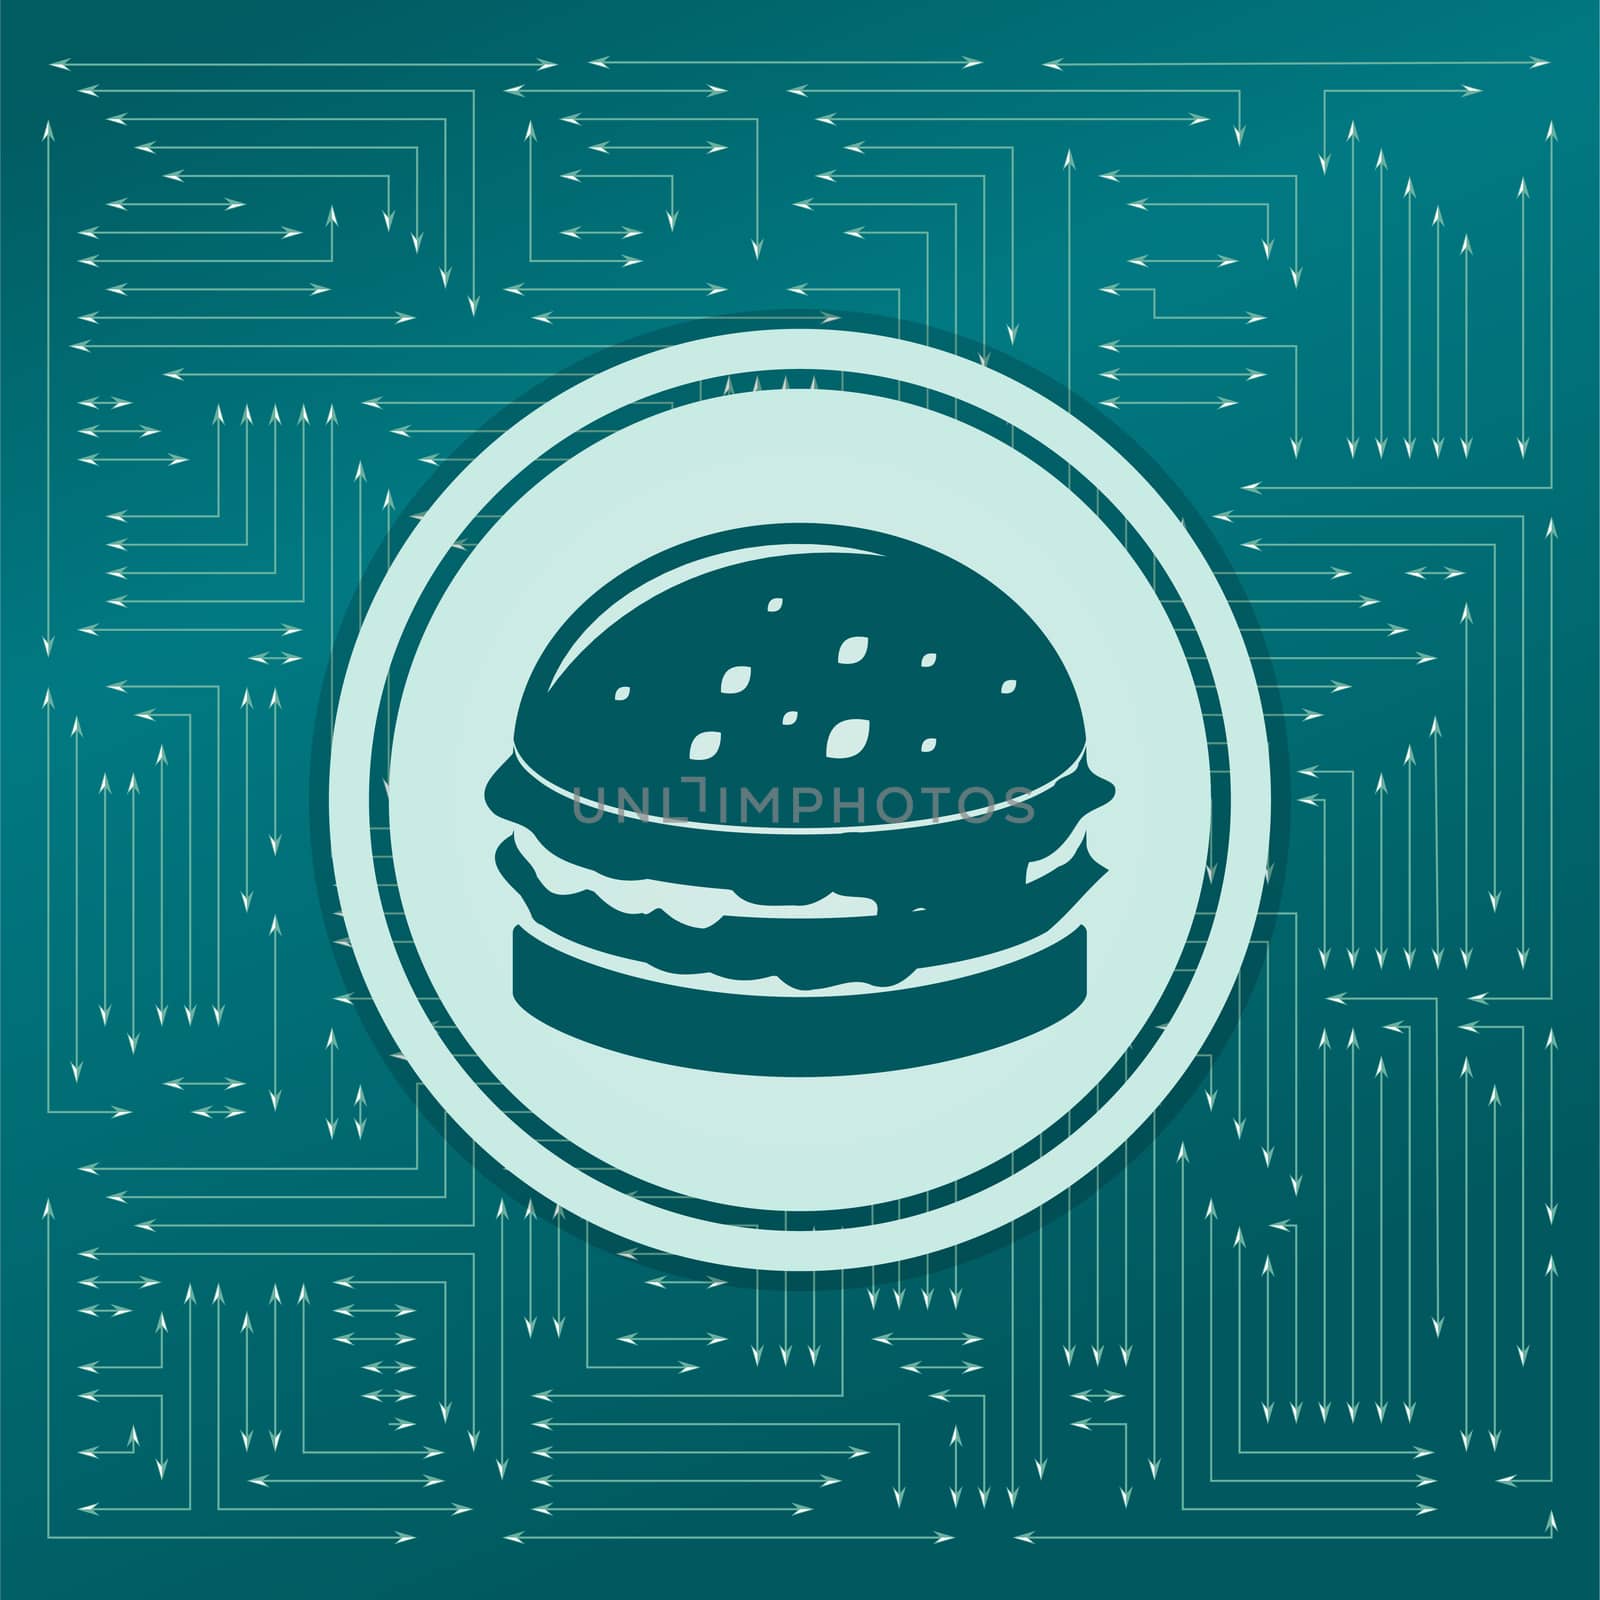 Burger, sandwich, hamburger icon on a green background, with arrows in different directions. It appears on the electronic board. illustration